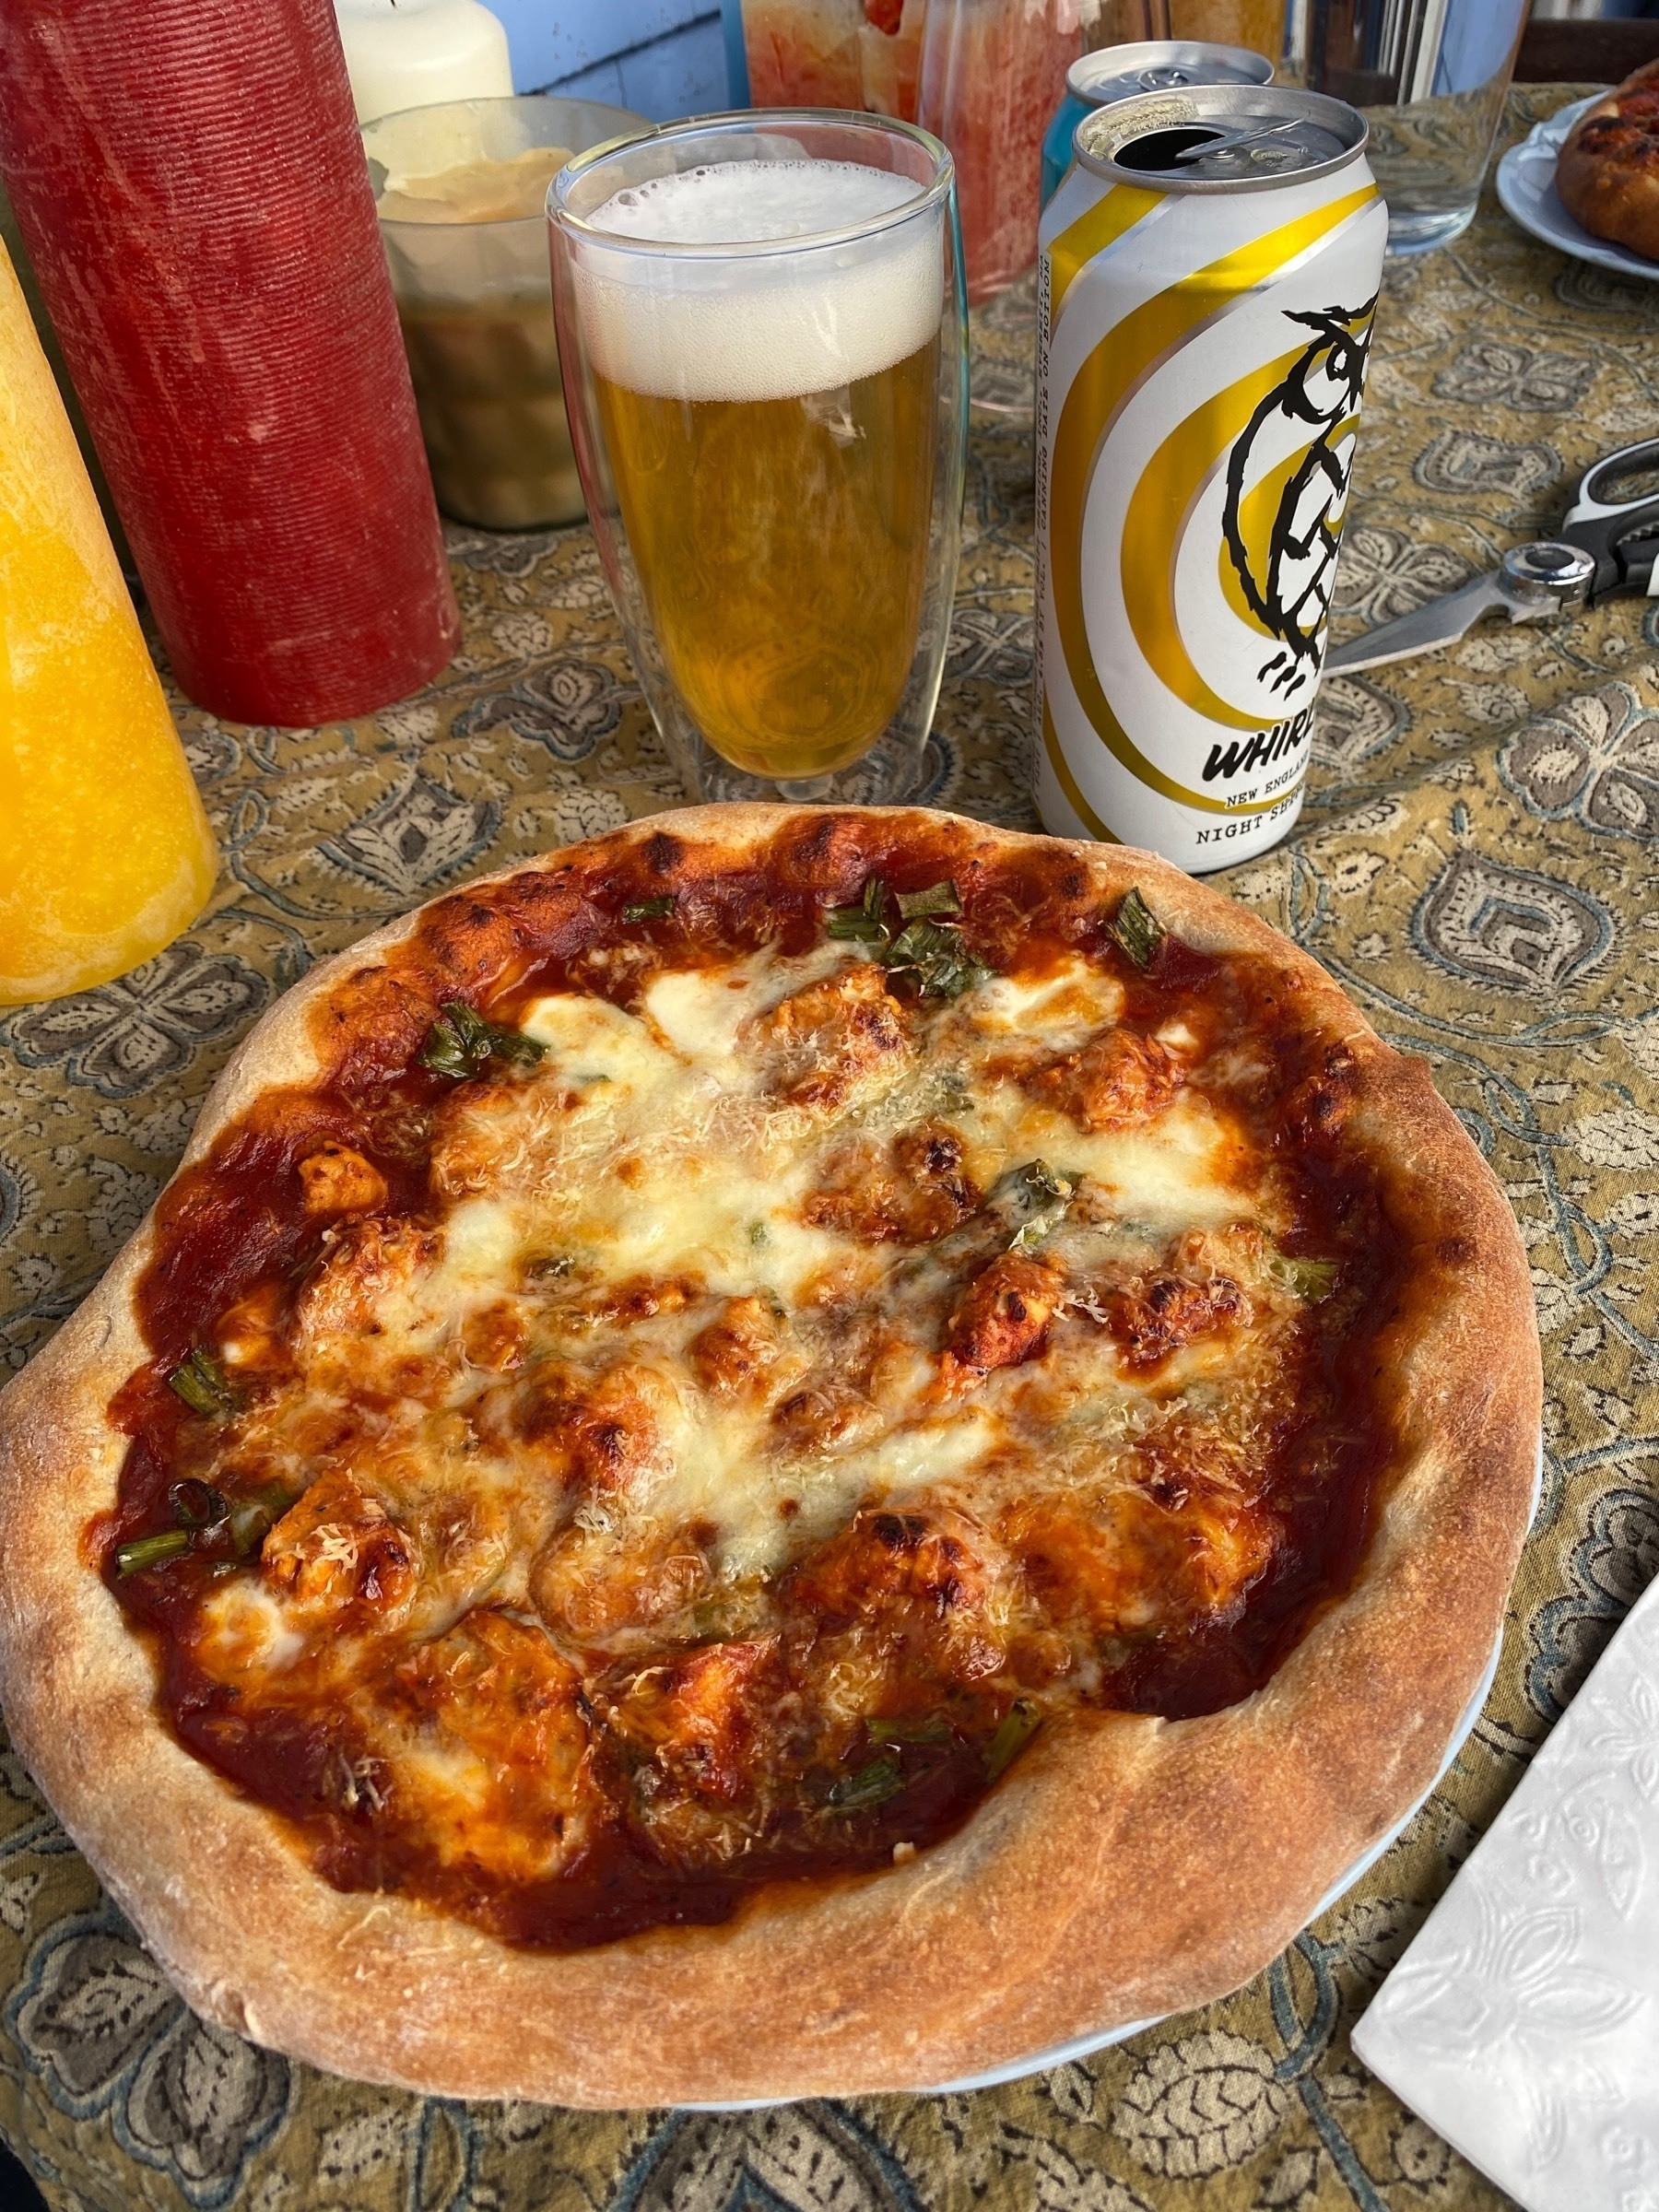 Small pizza on a table next to a glass of Whilpool beer.